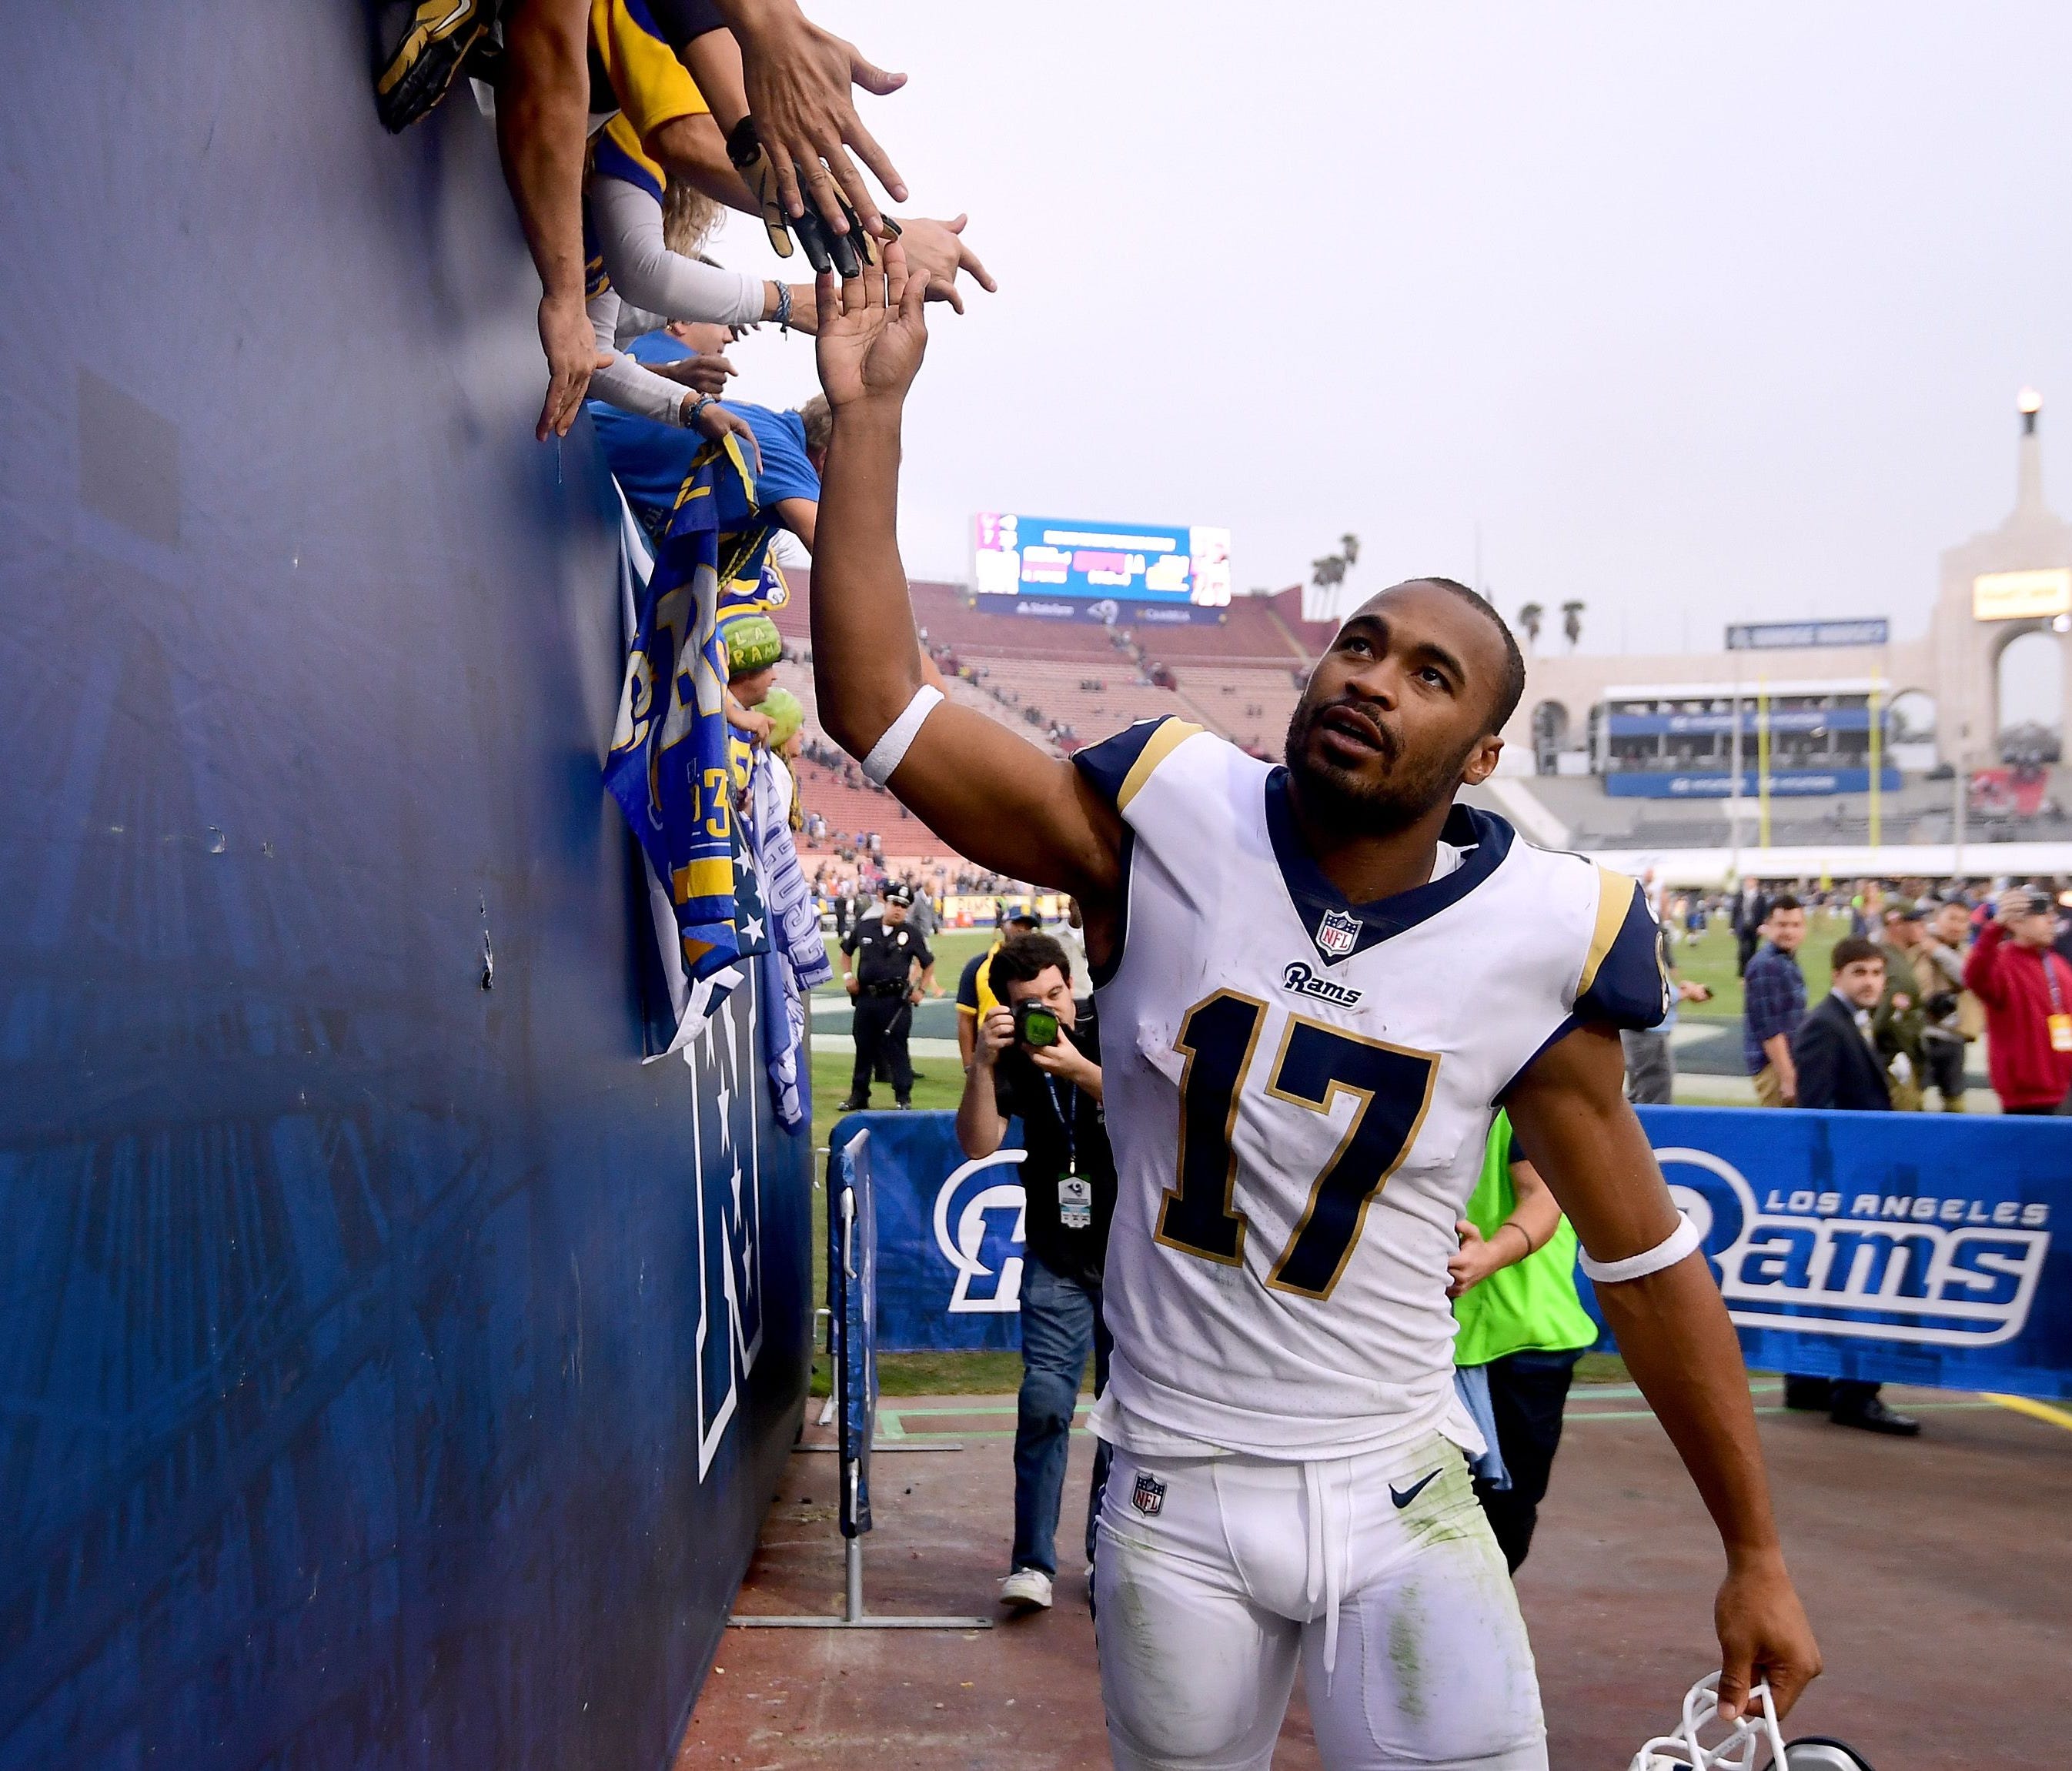 Los Angeles Rams receiver Robert Woods celebrates with fans during a recent victory.